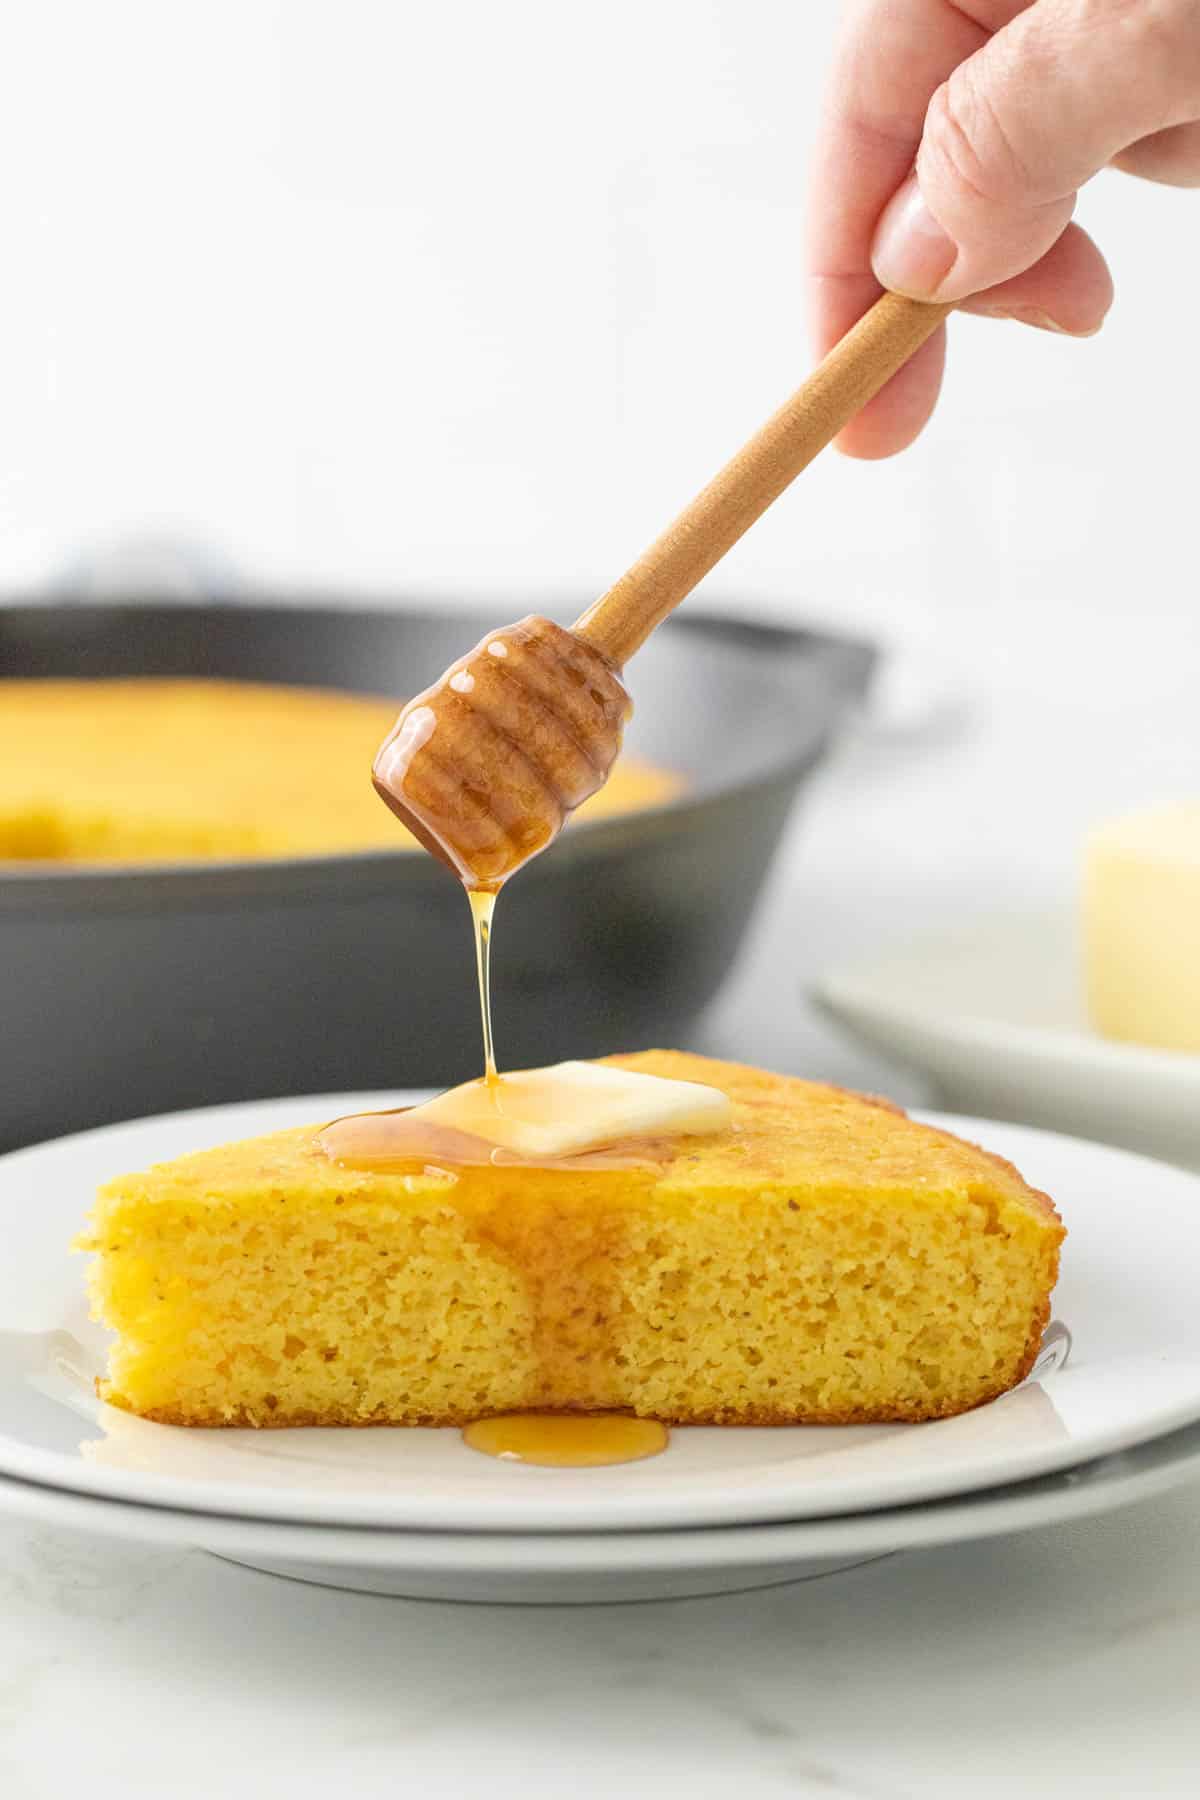 A honey dipper being held over a slice of cornbread, drizzling honey over the cornbread.